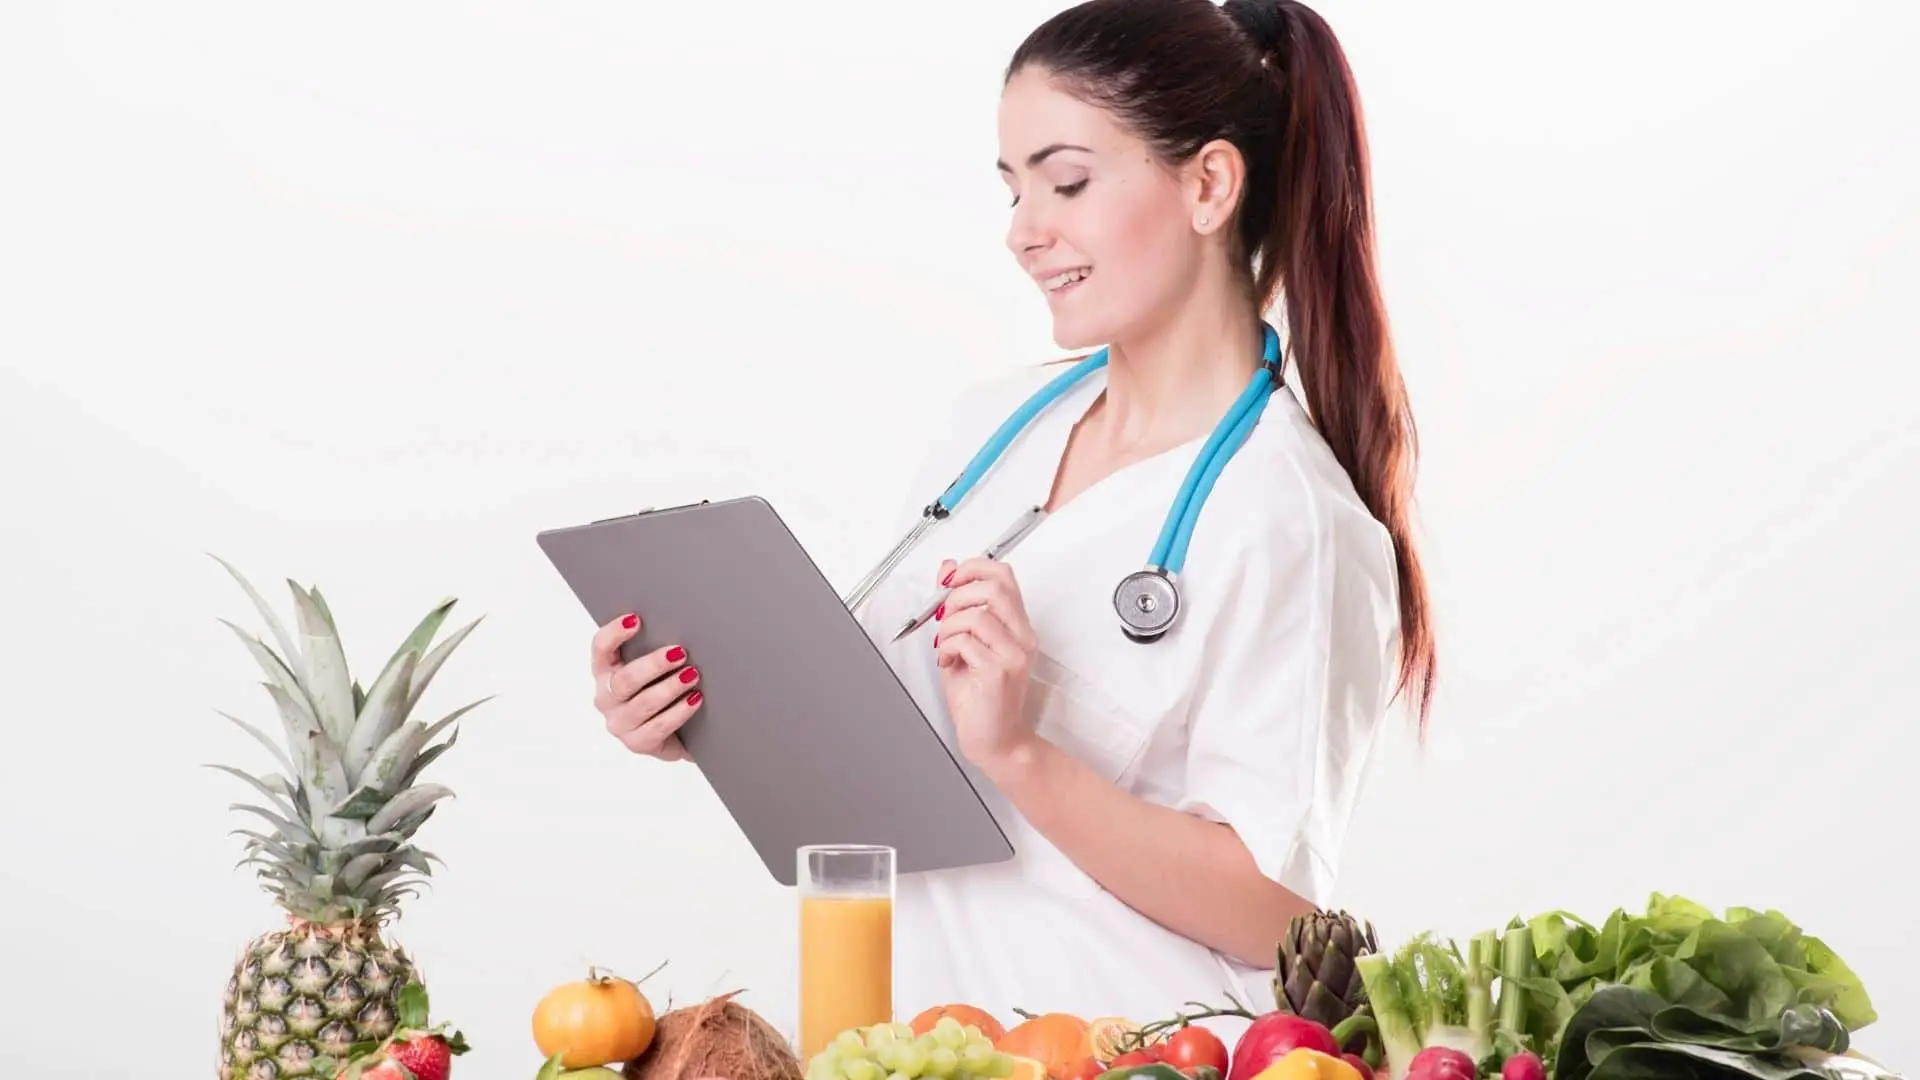 How to become a Registered Dietitian